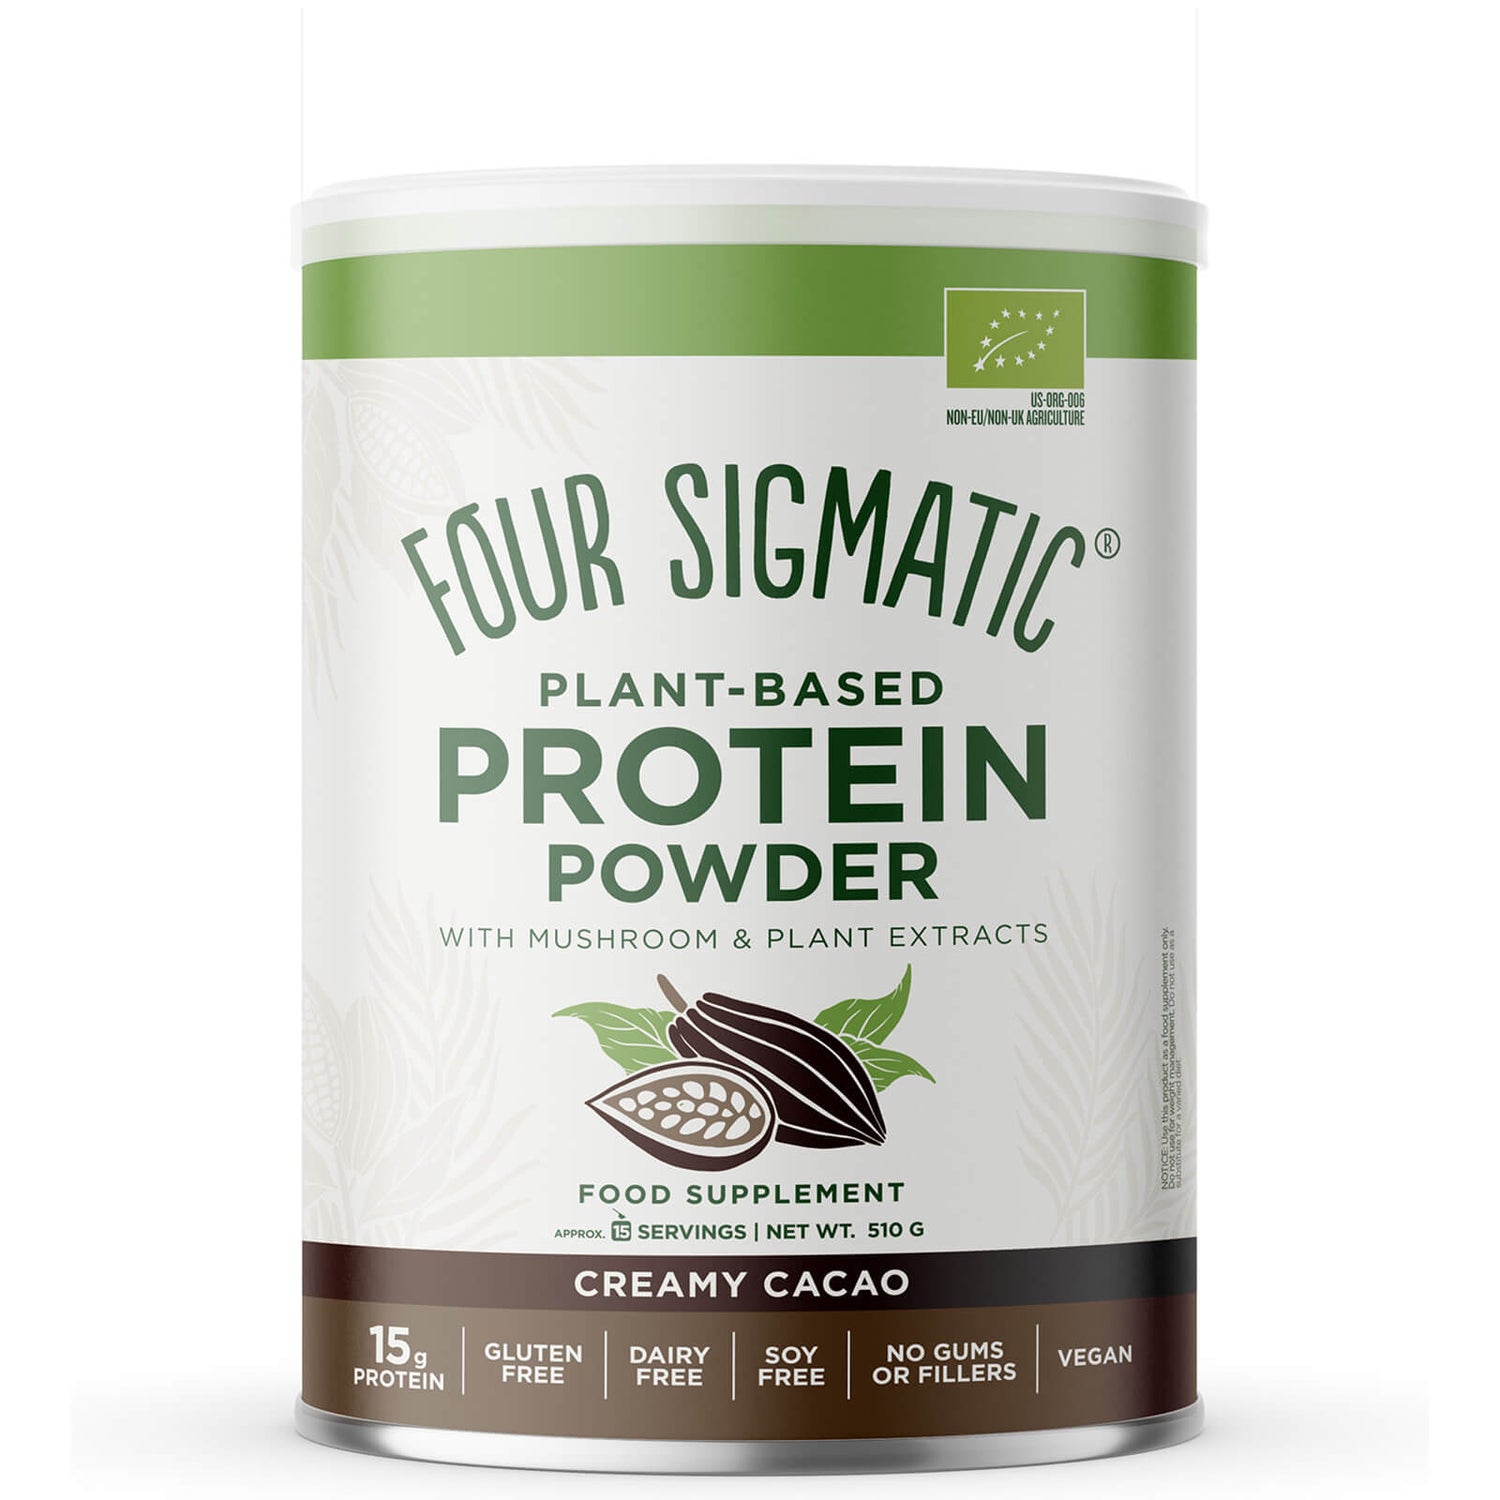 Four Sigmatic Plant-Based Protein with Superfoods